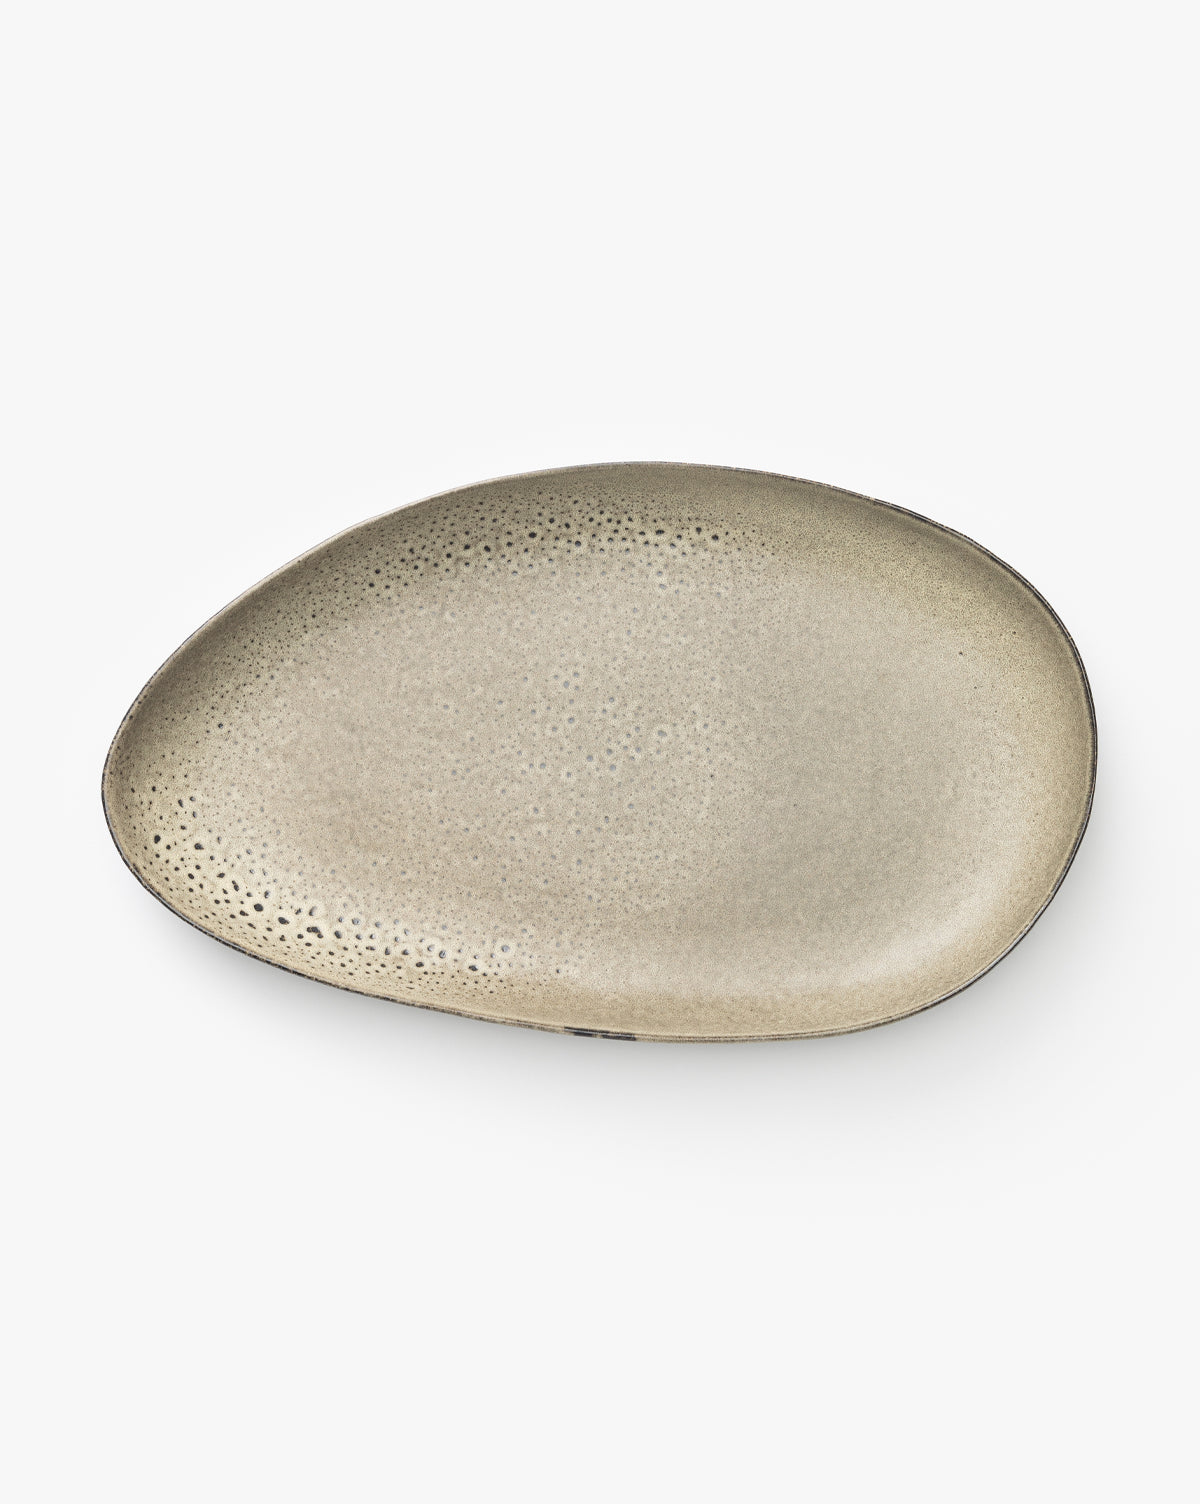 BIDK Home, Oyster Oval Tray